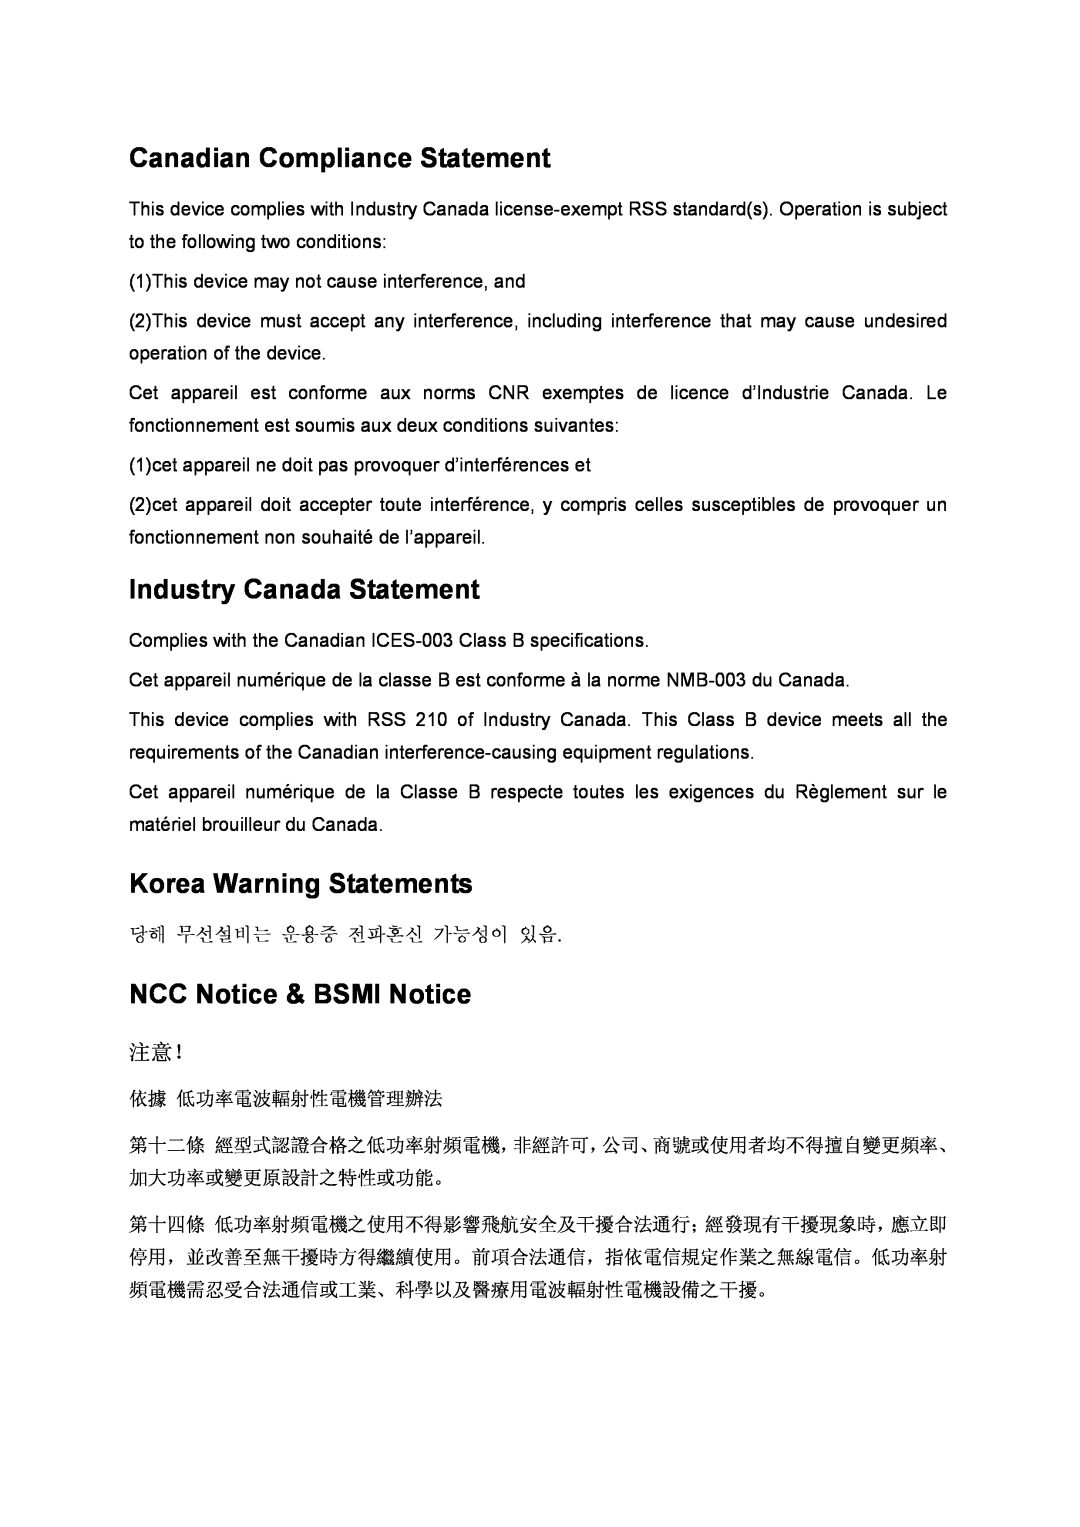 TP-Link AC1750 manual Canadian Compliance Statement, Industry Canada Statement, Korea Warning Statements 